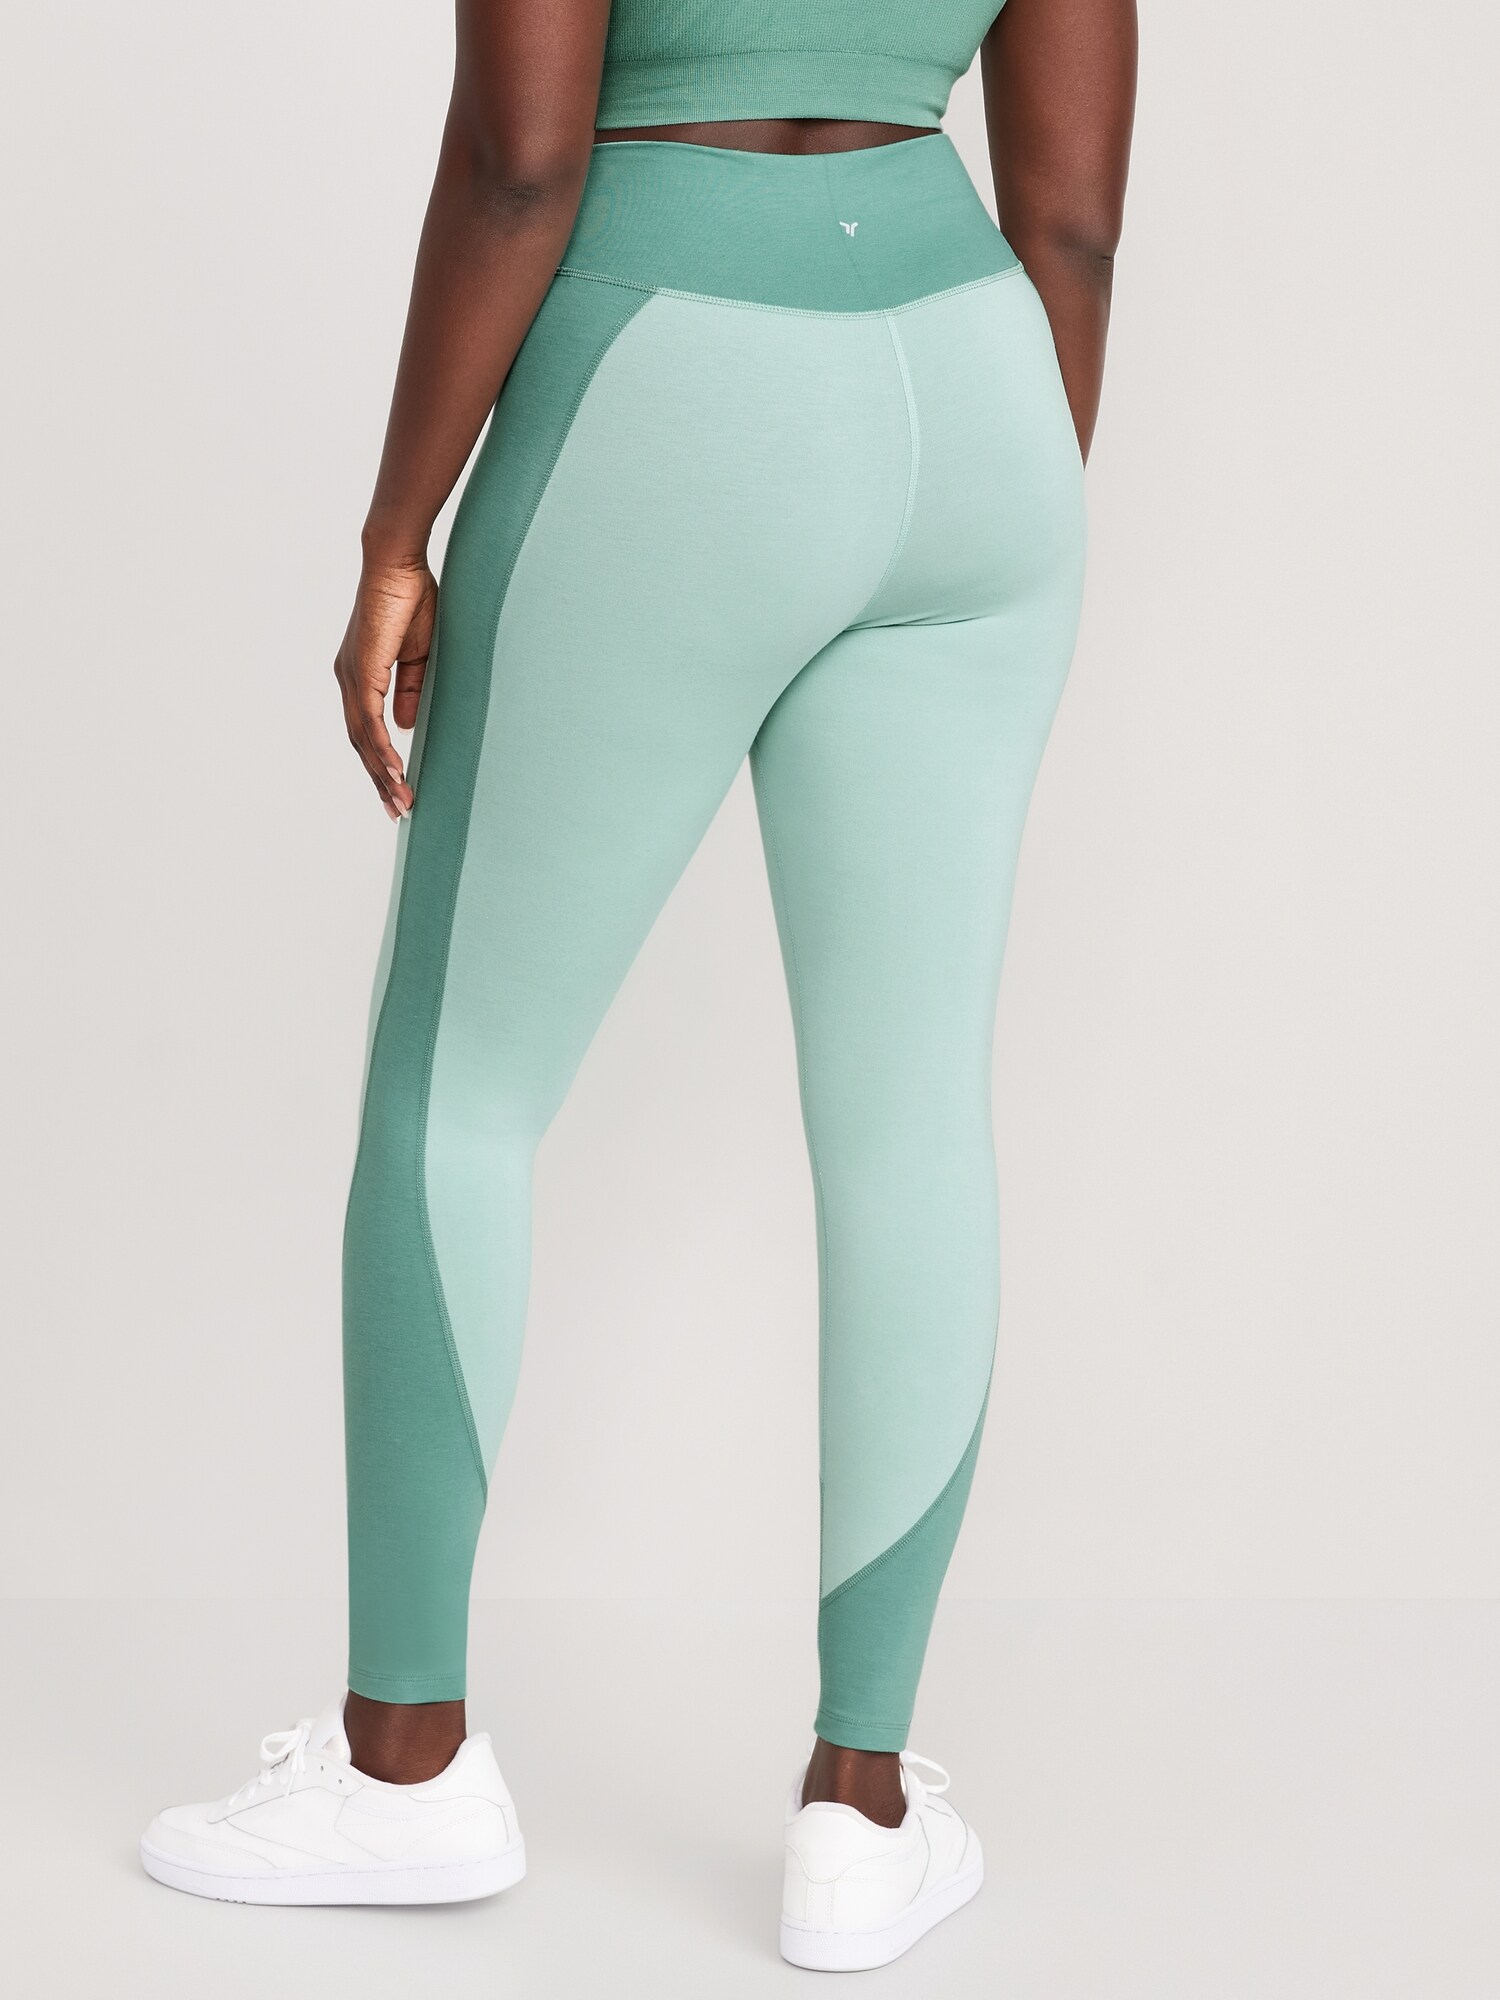 Extra High-Waisted PowerChill Two-Tone Compression Leggings for